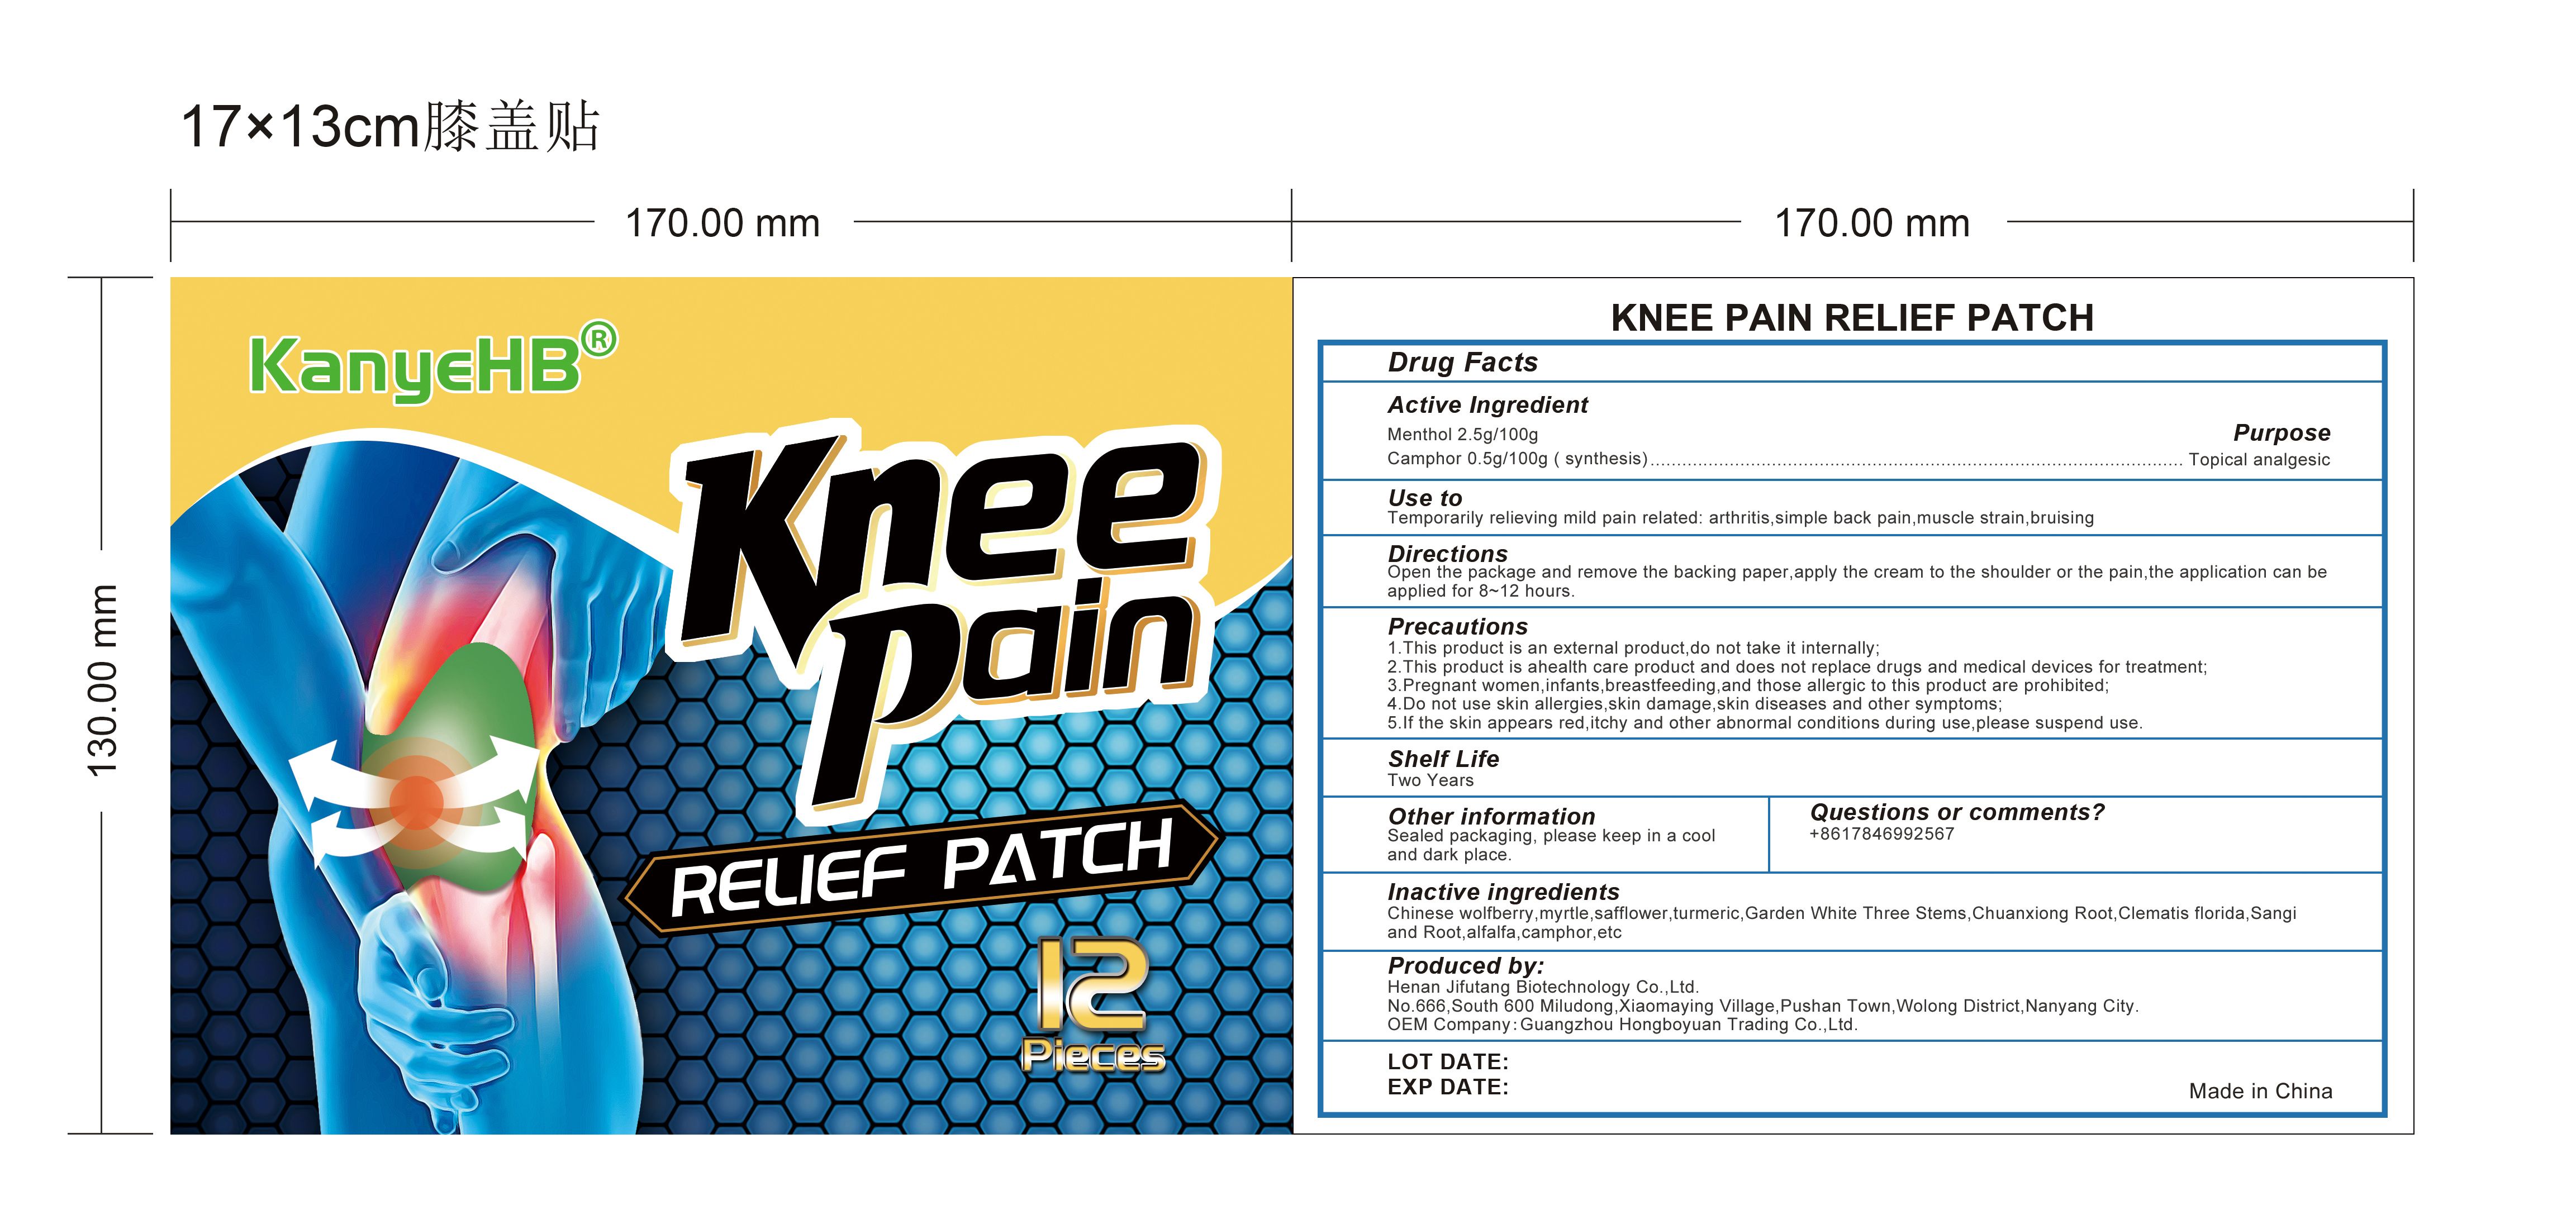 Knee Pain Relief Patch label